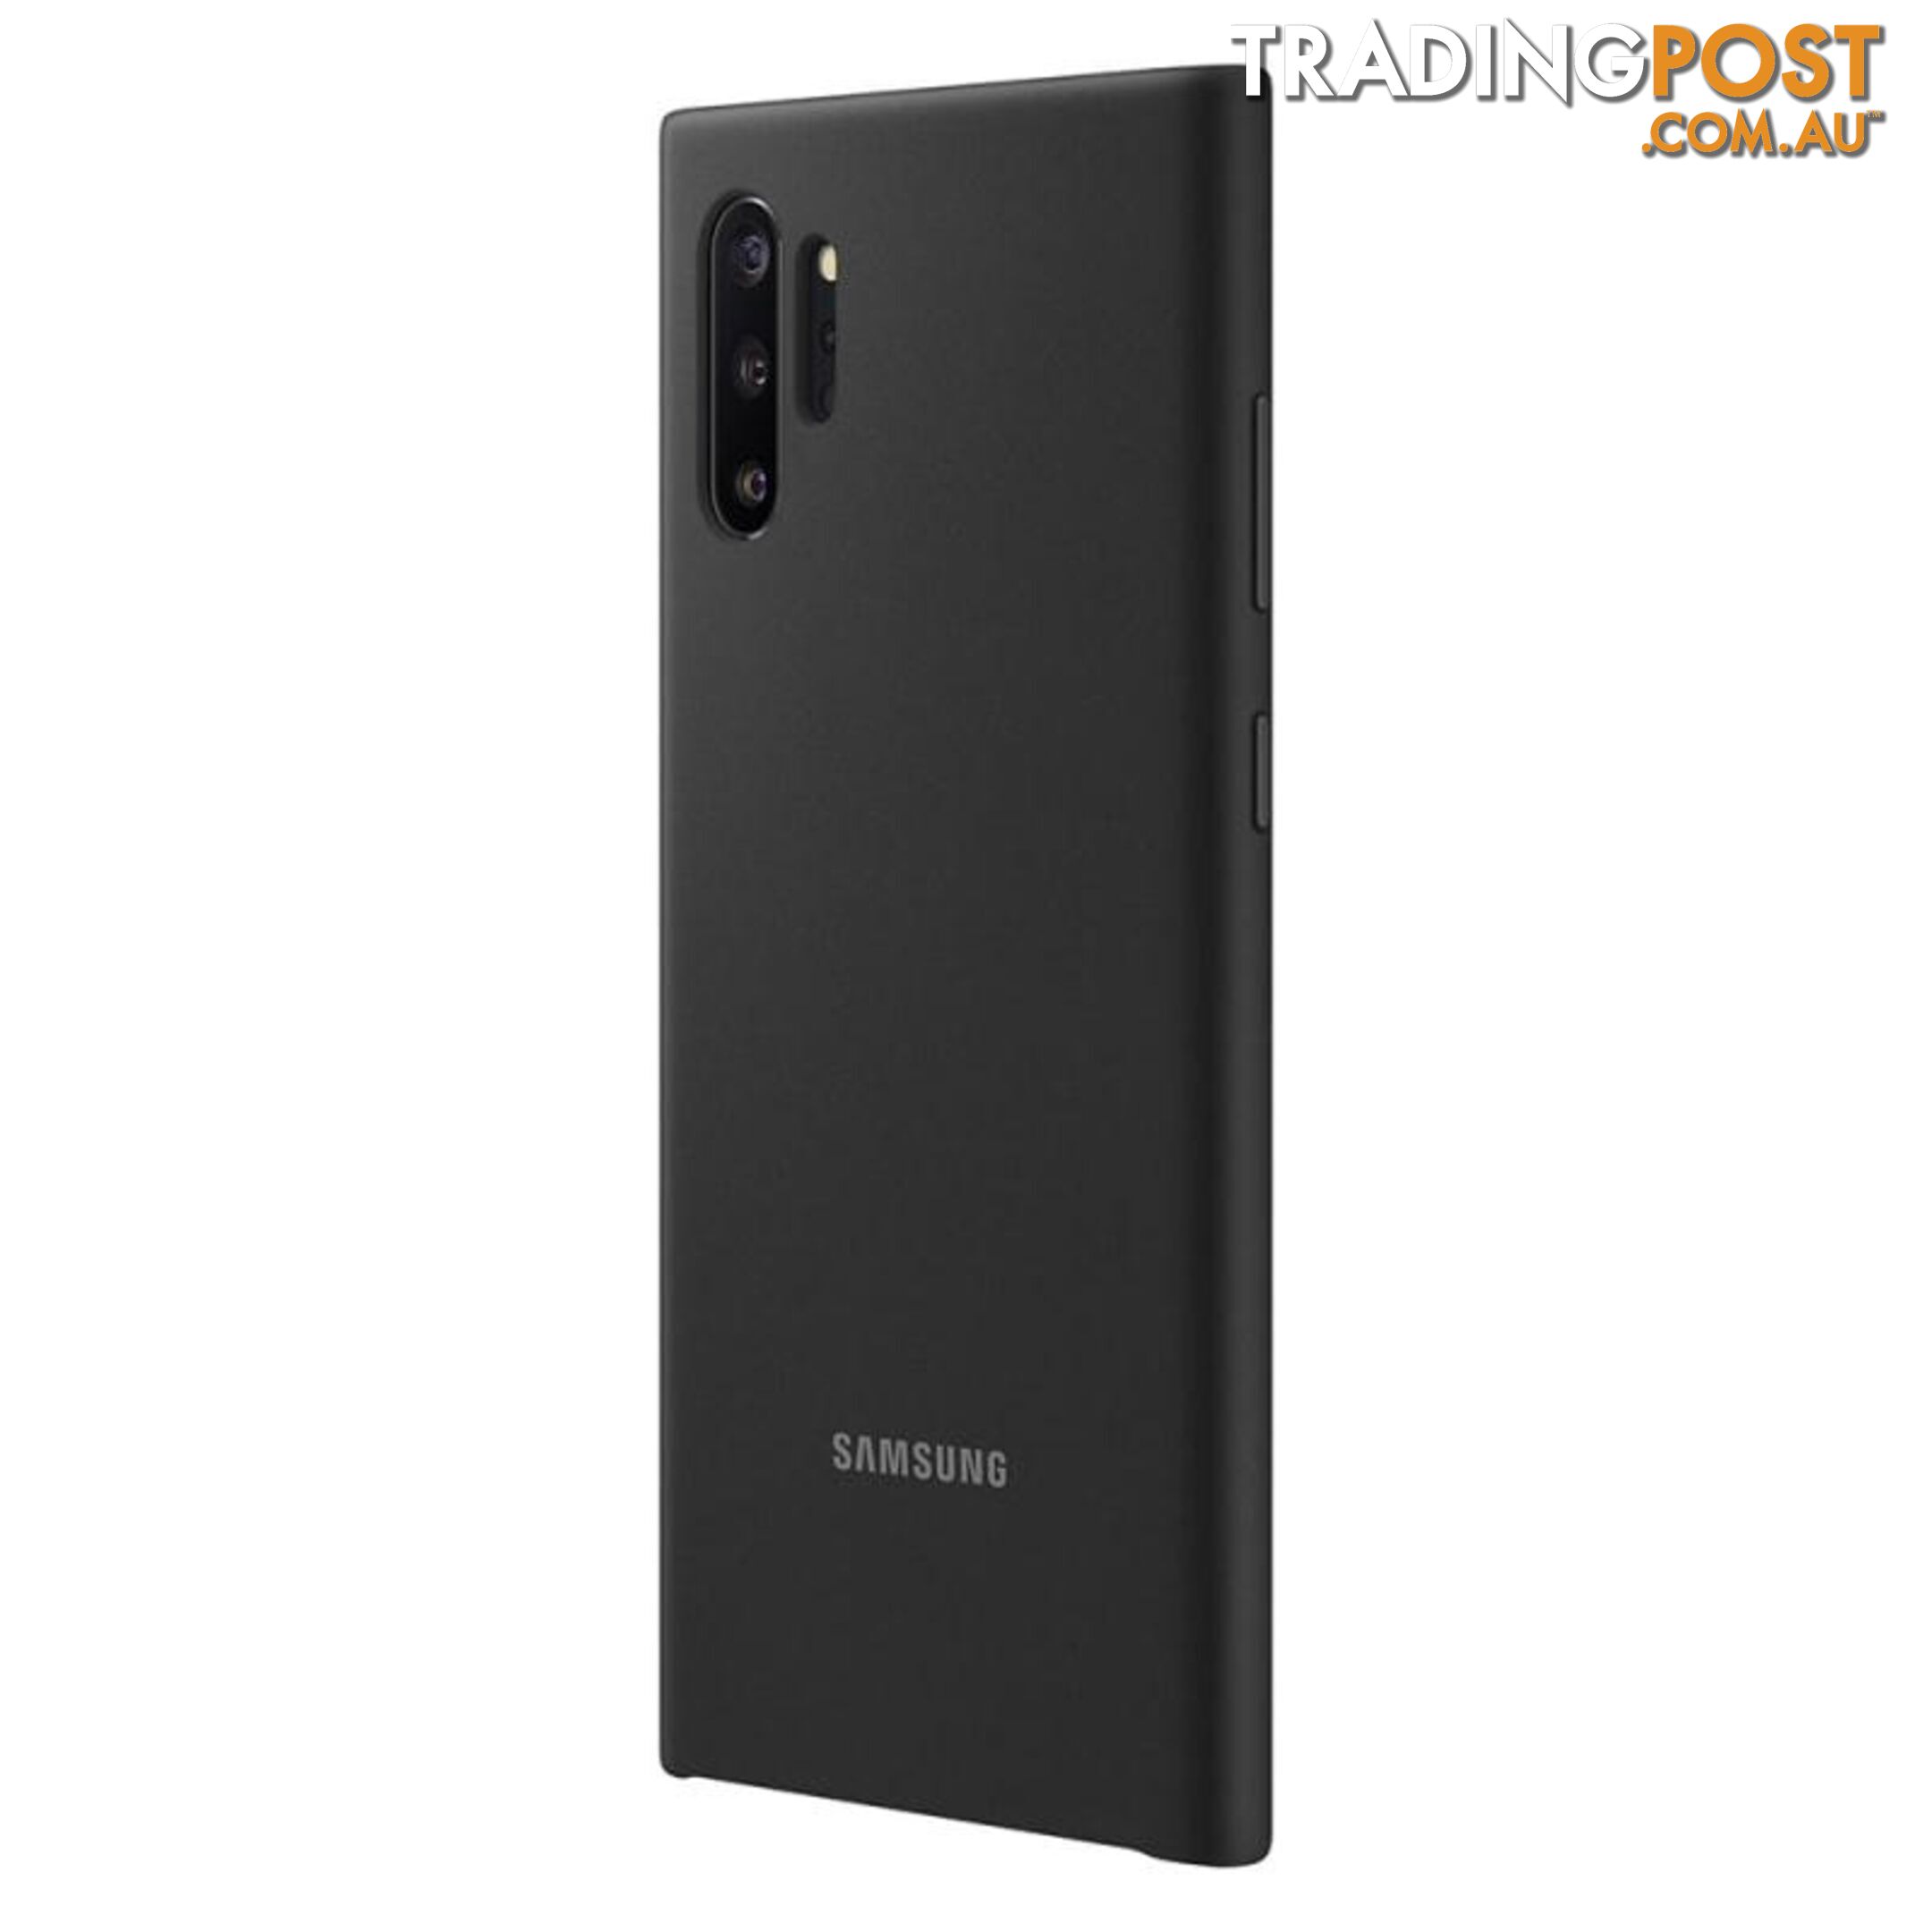 Samsung Silicone Cover For Samsung Galaxy Note 10+ - Samsung - Black - 8806090029264